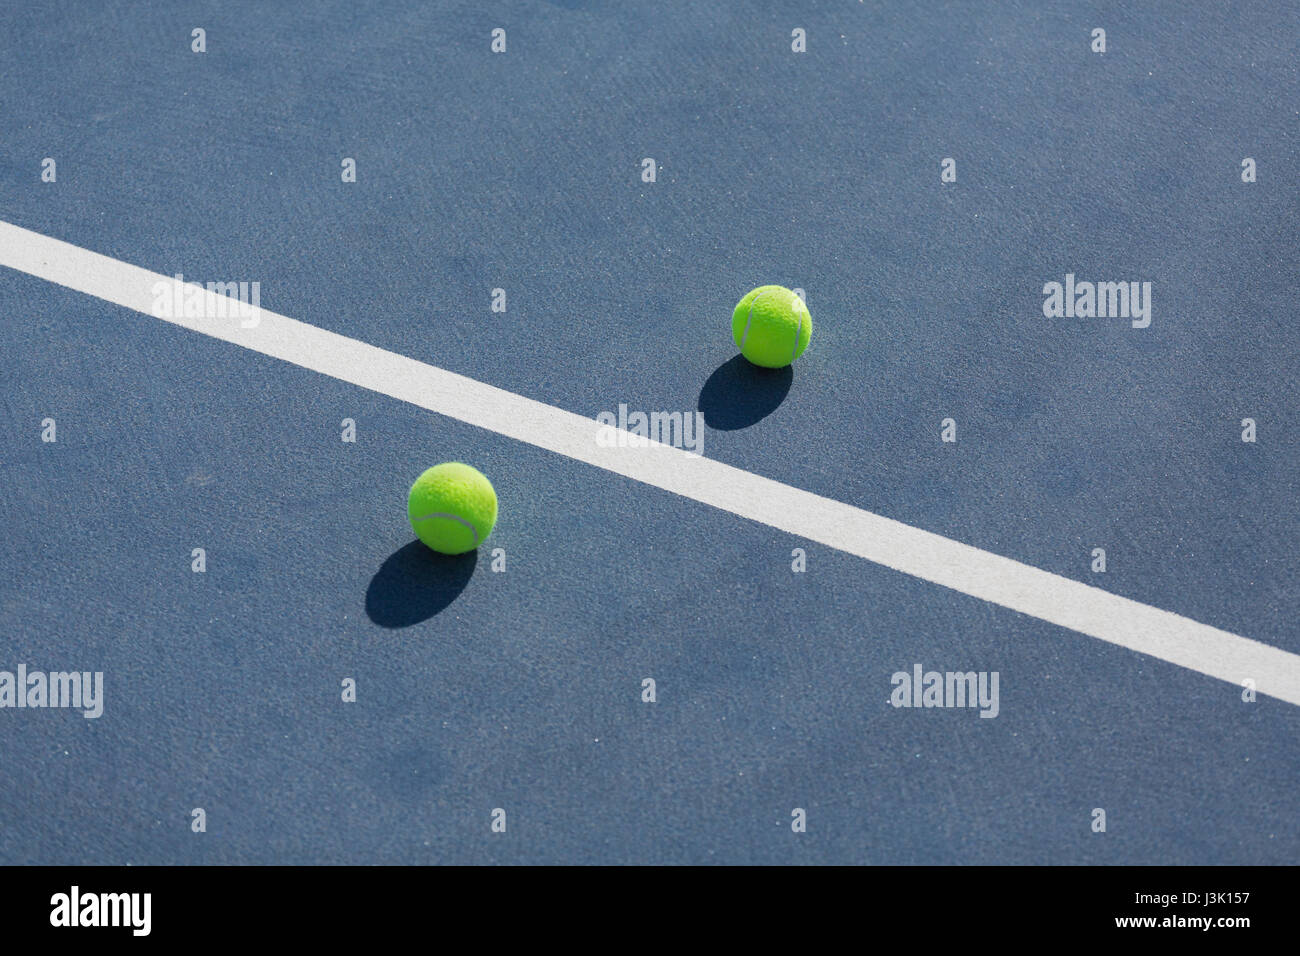 tennis balls on blue hard court divided with white line Stock Photo